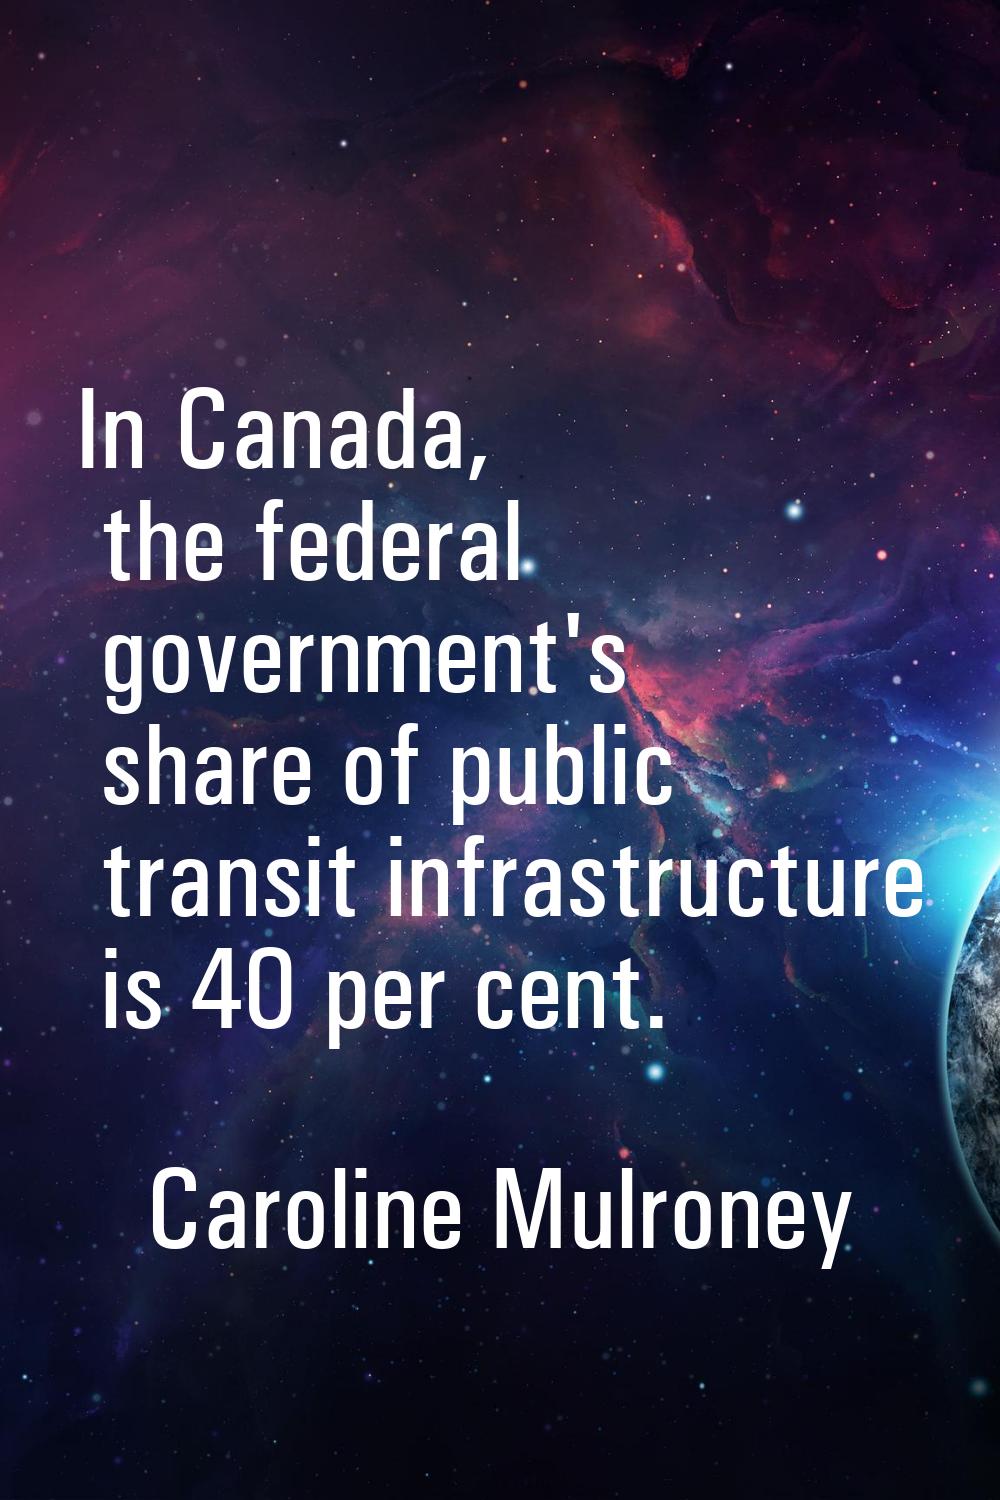 In Canada, the federal government's share of public transit infrastructure is 40 per cent.